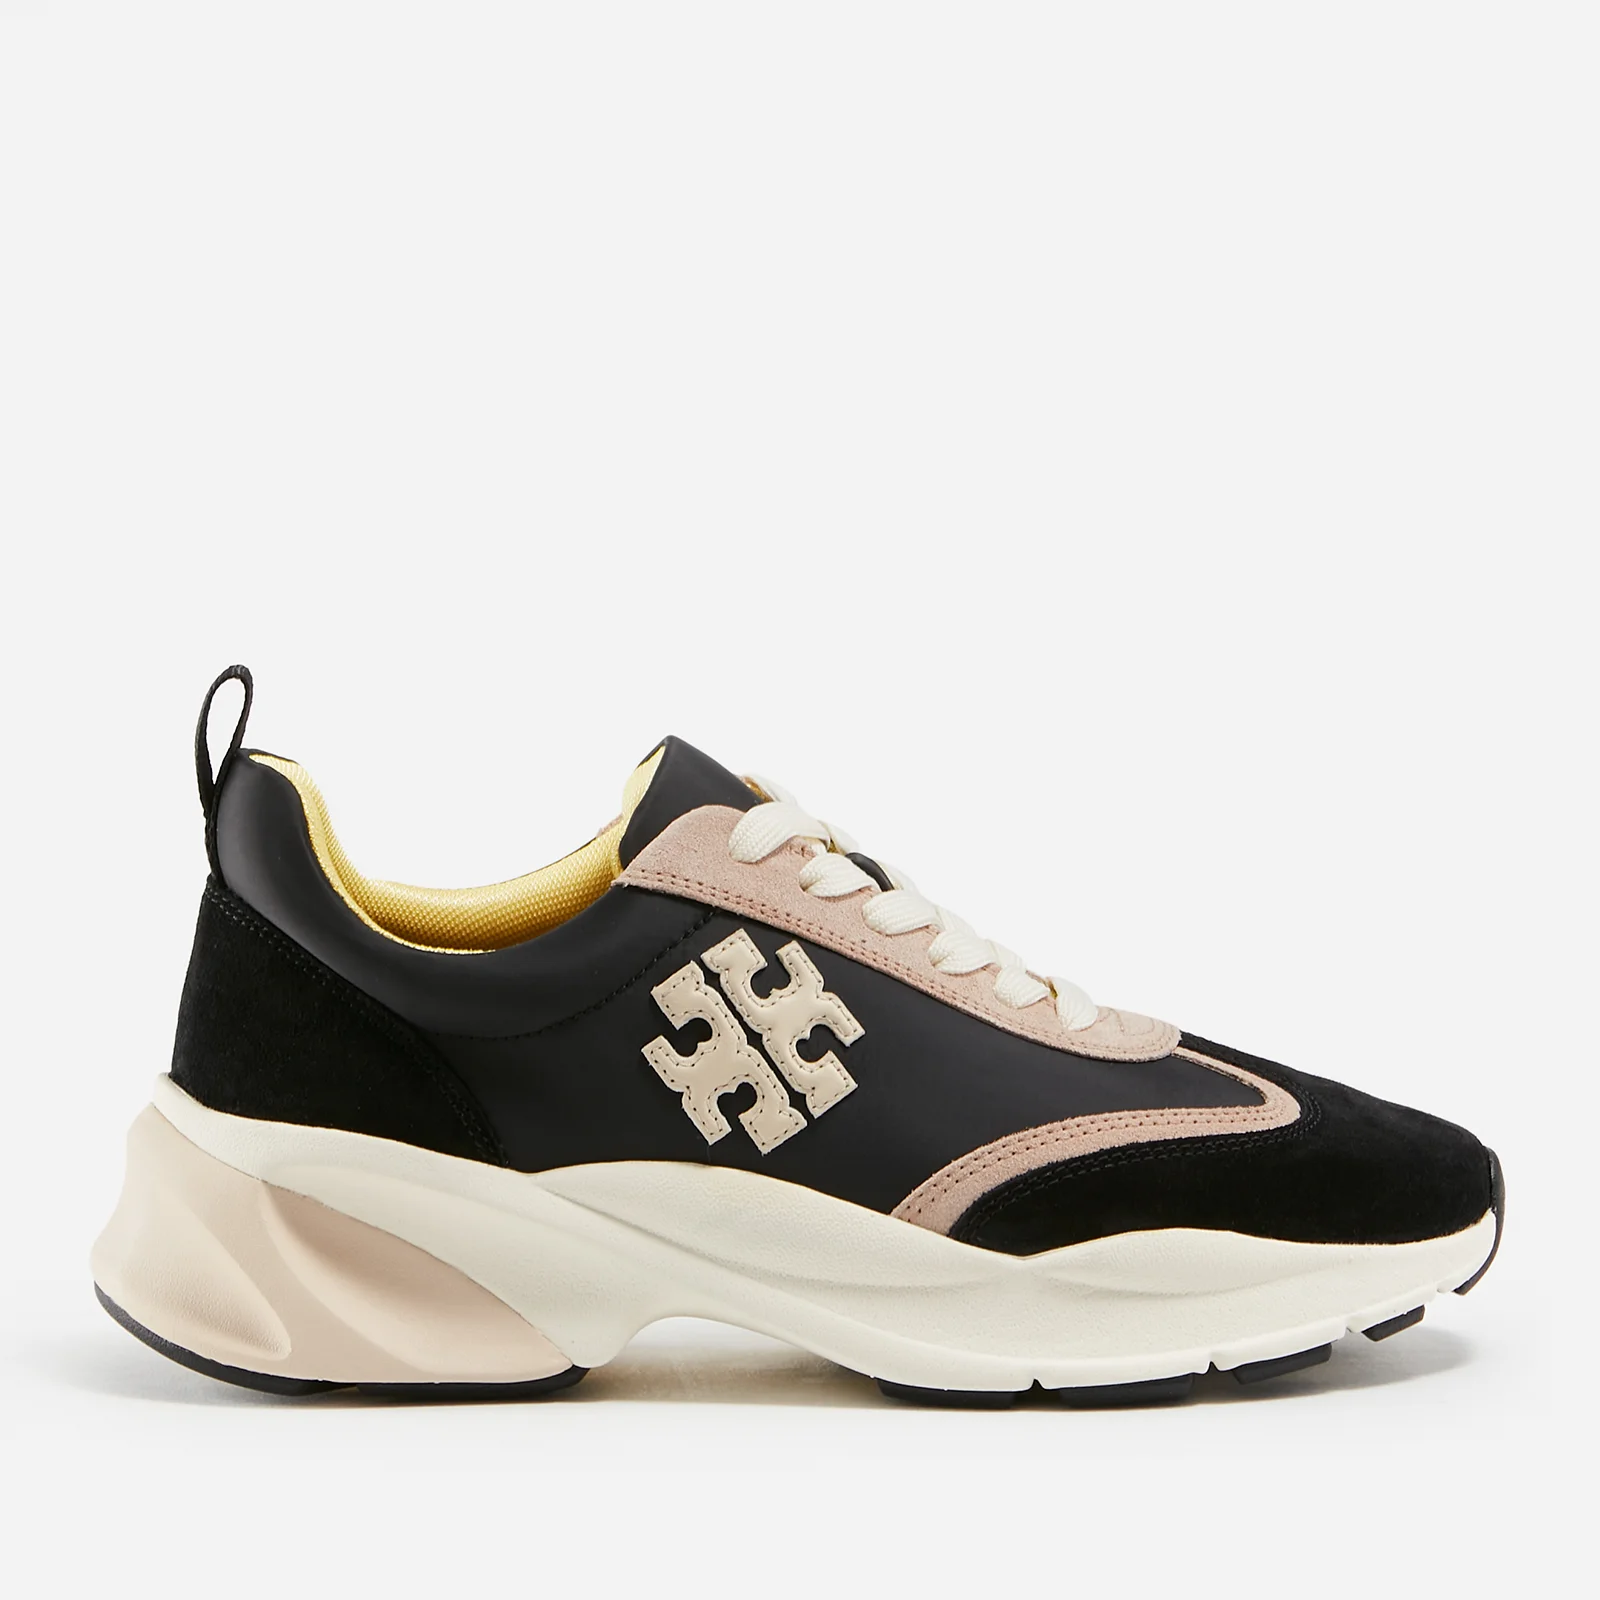 Tory Burch Good Luck Nylon and Suede Running-Style Trainers Image 1